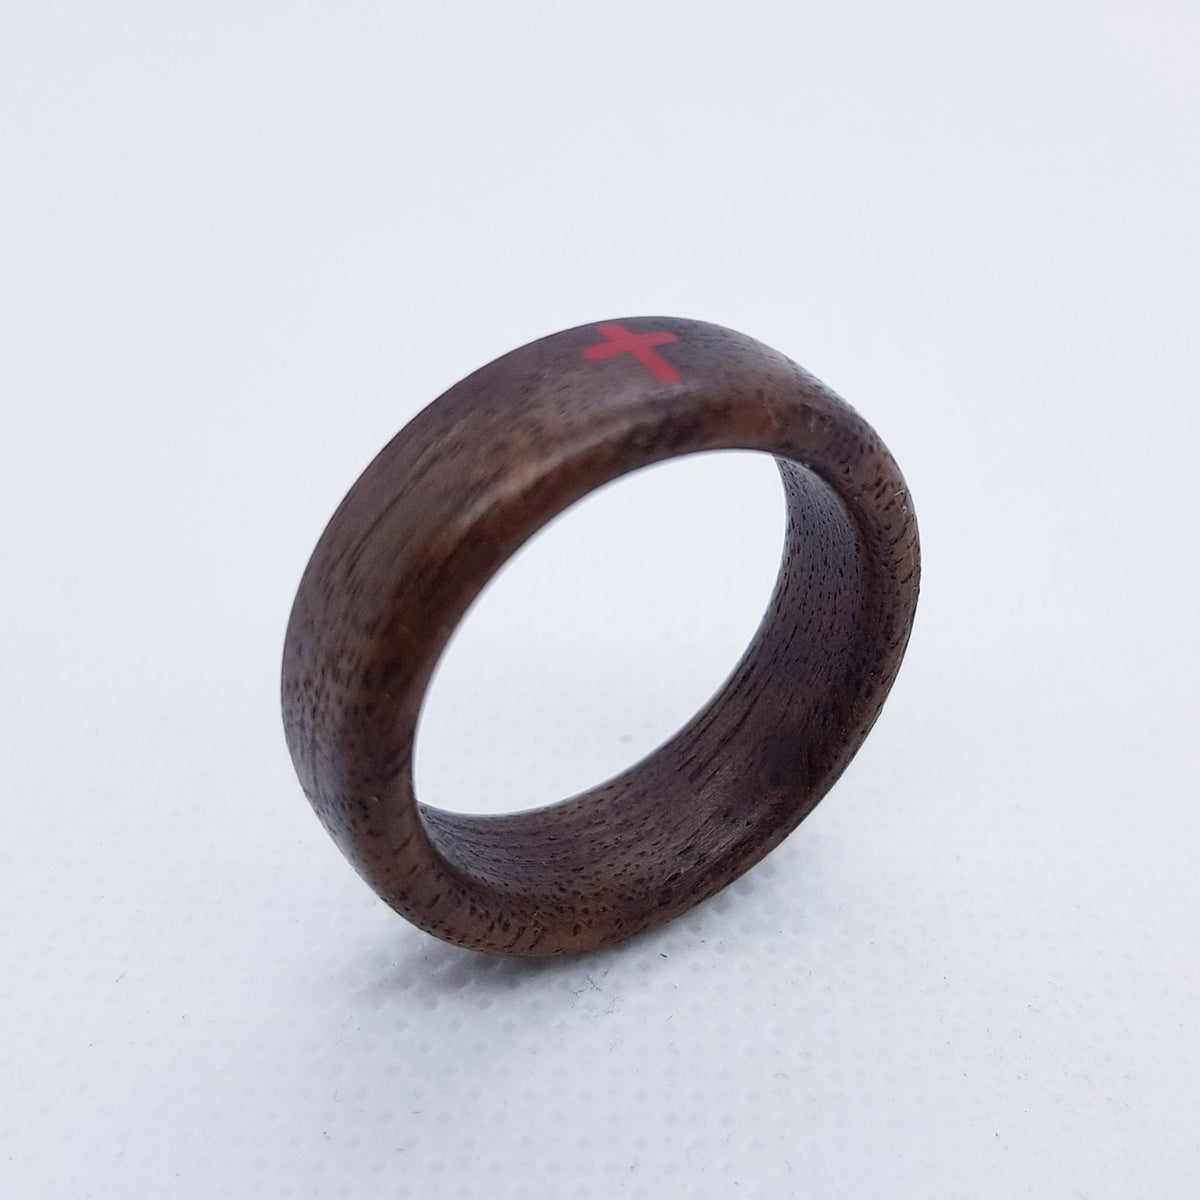 Mozzin Wood Rings Wooden Band For Men and Women, Natural Hardwood Ring,  Walnut and Maple combined, Comfort Fit, Infinity Motif Inlaid